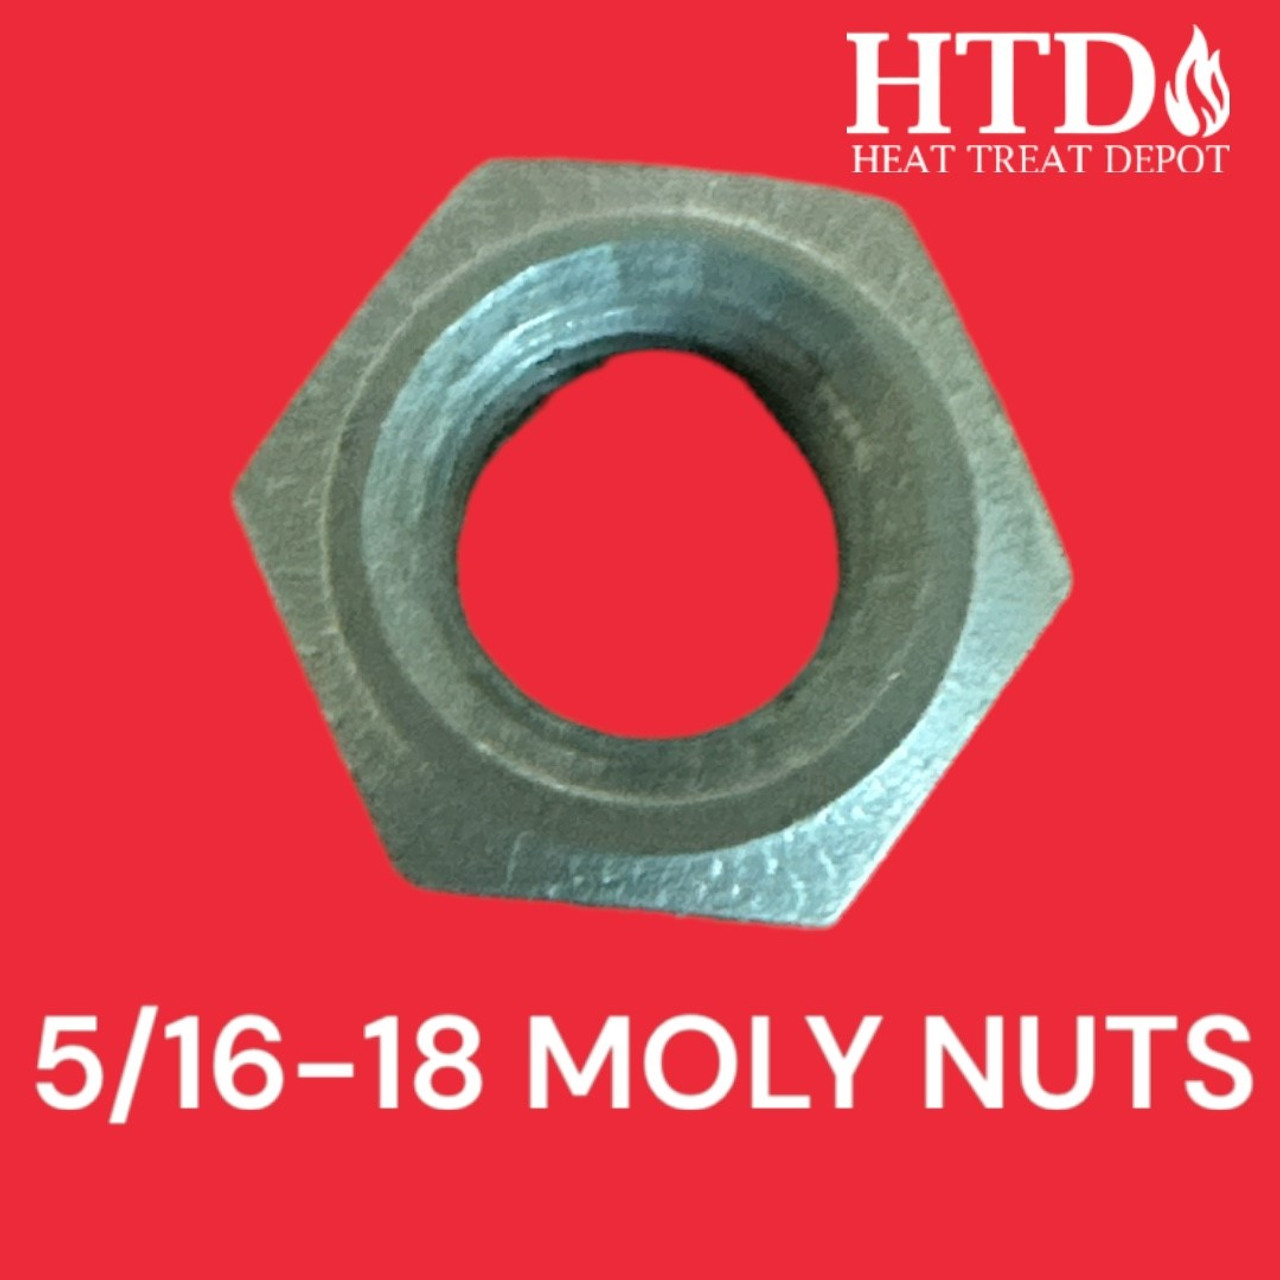 Moly Nuts 5/16-18